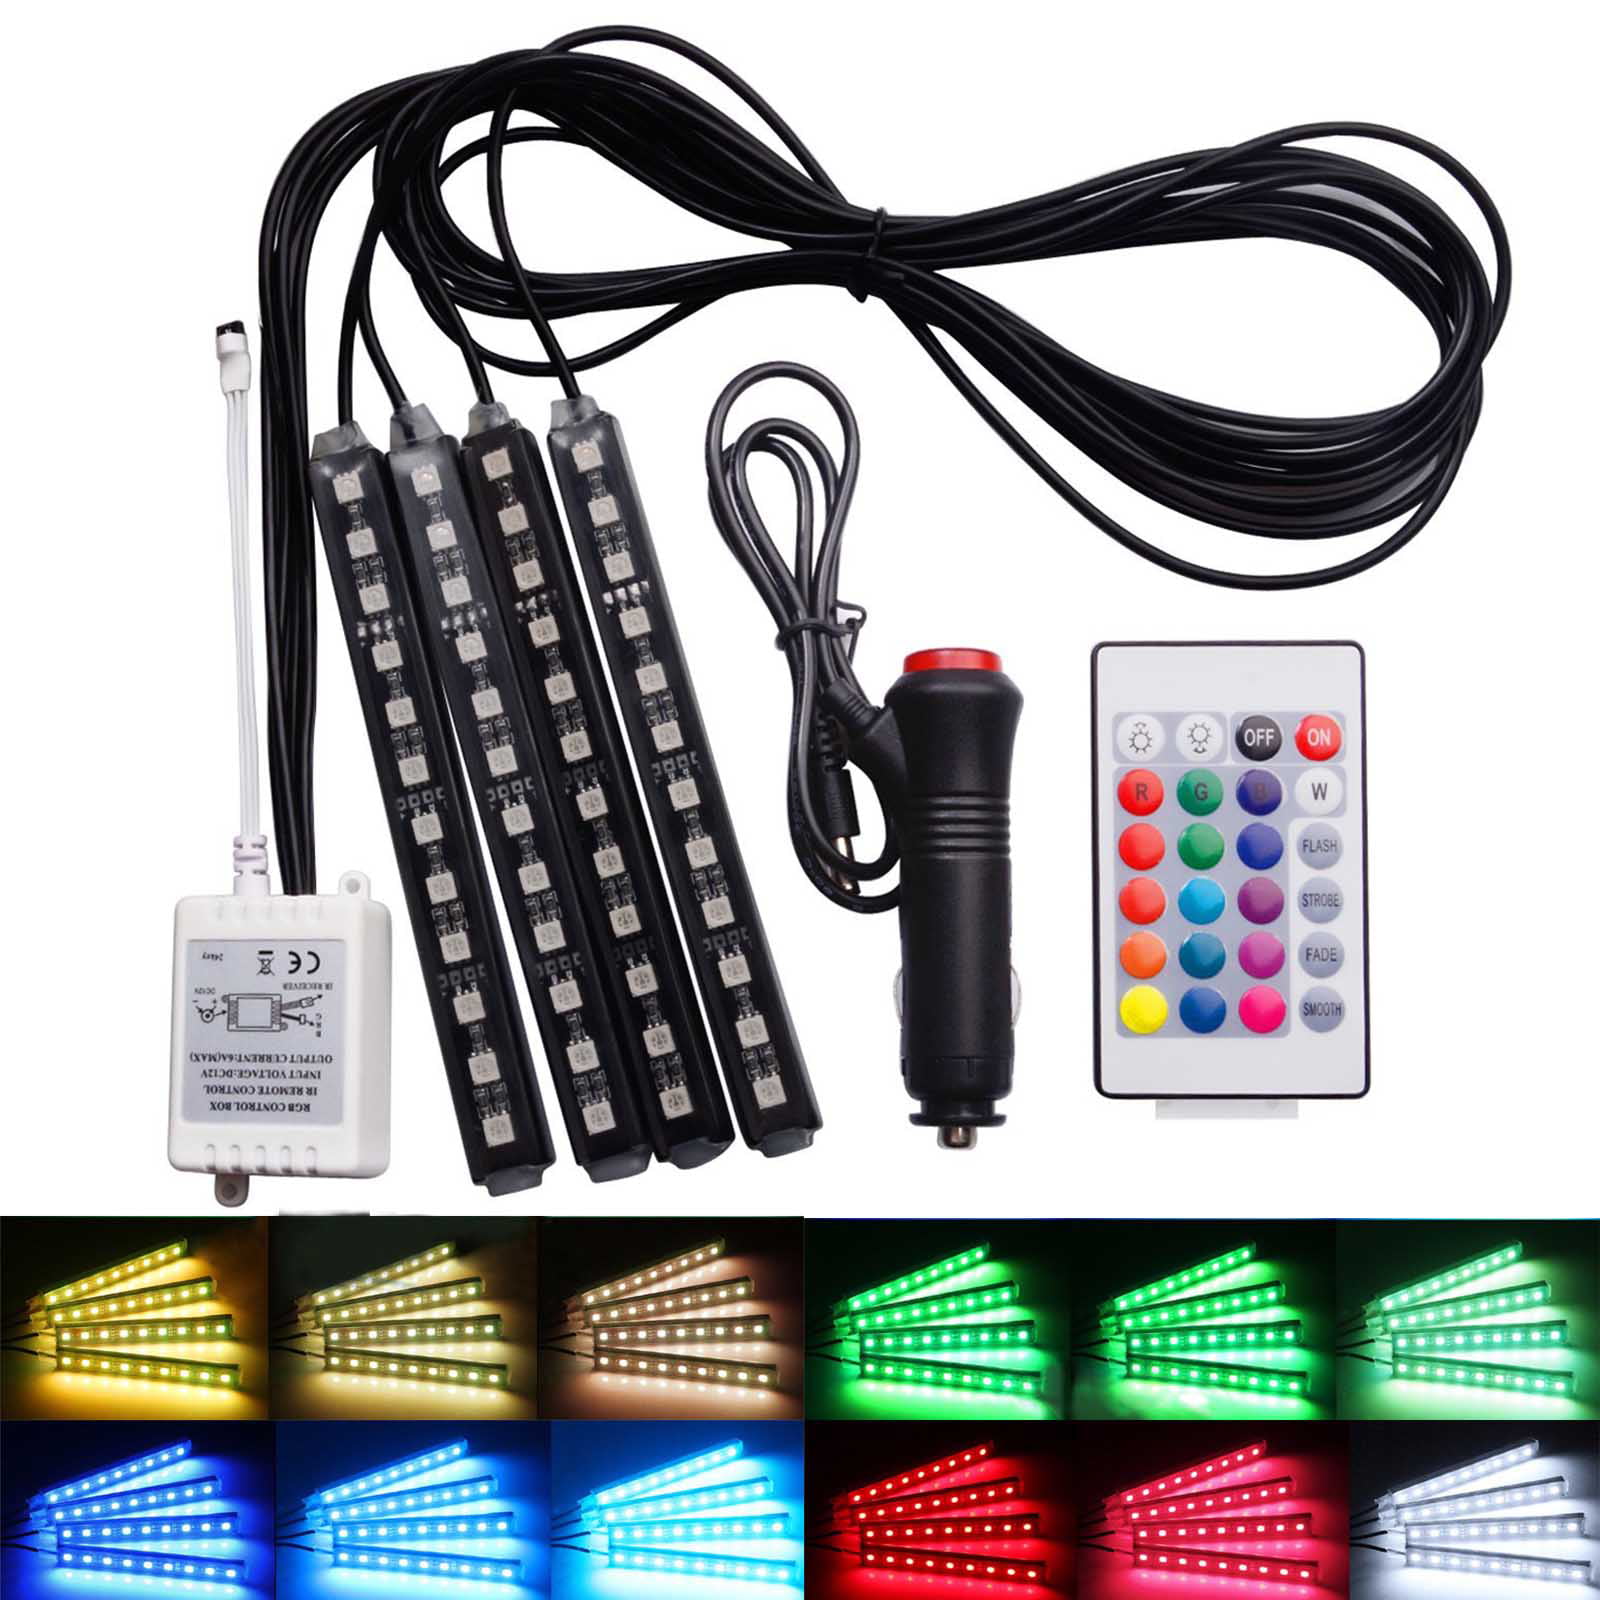 Fugen 4 Pcs USB Car Interior 5050 SMD LED Strip Light RGB color Atmosphere Decorative SMD Neon Lamp with 16 Signal Color Control and Wireless IR control Perfect for car Home Christmas Decoration etc. 